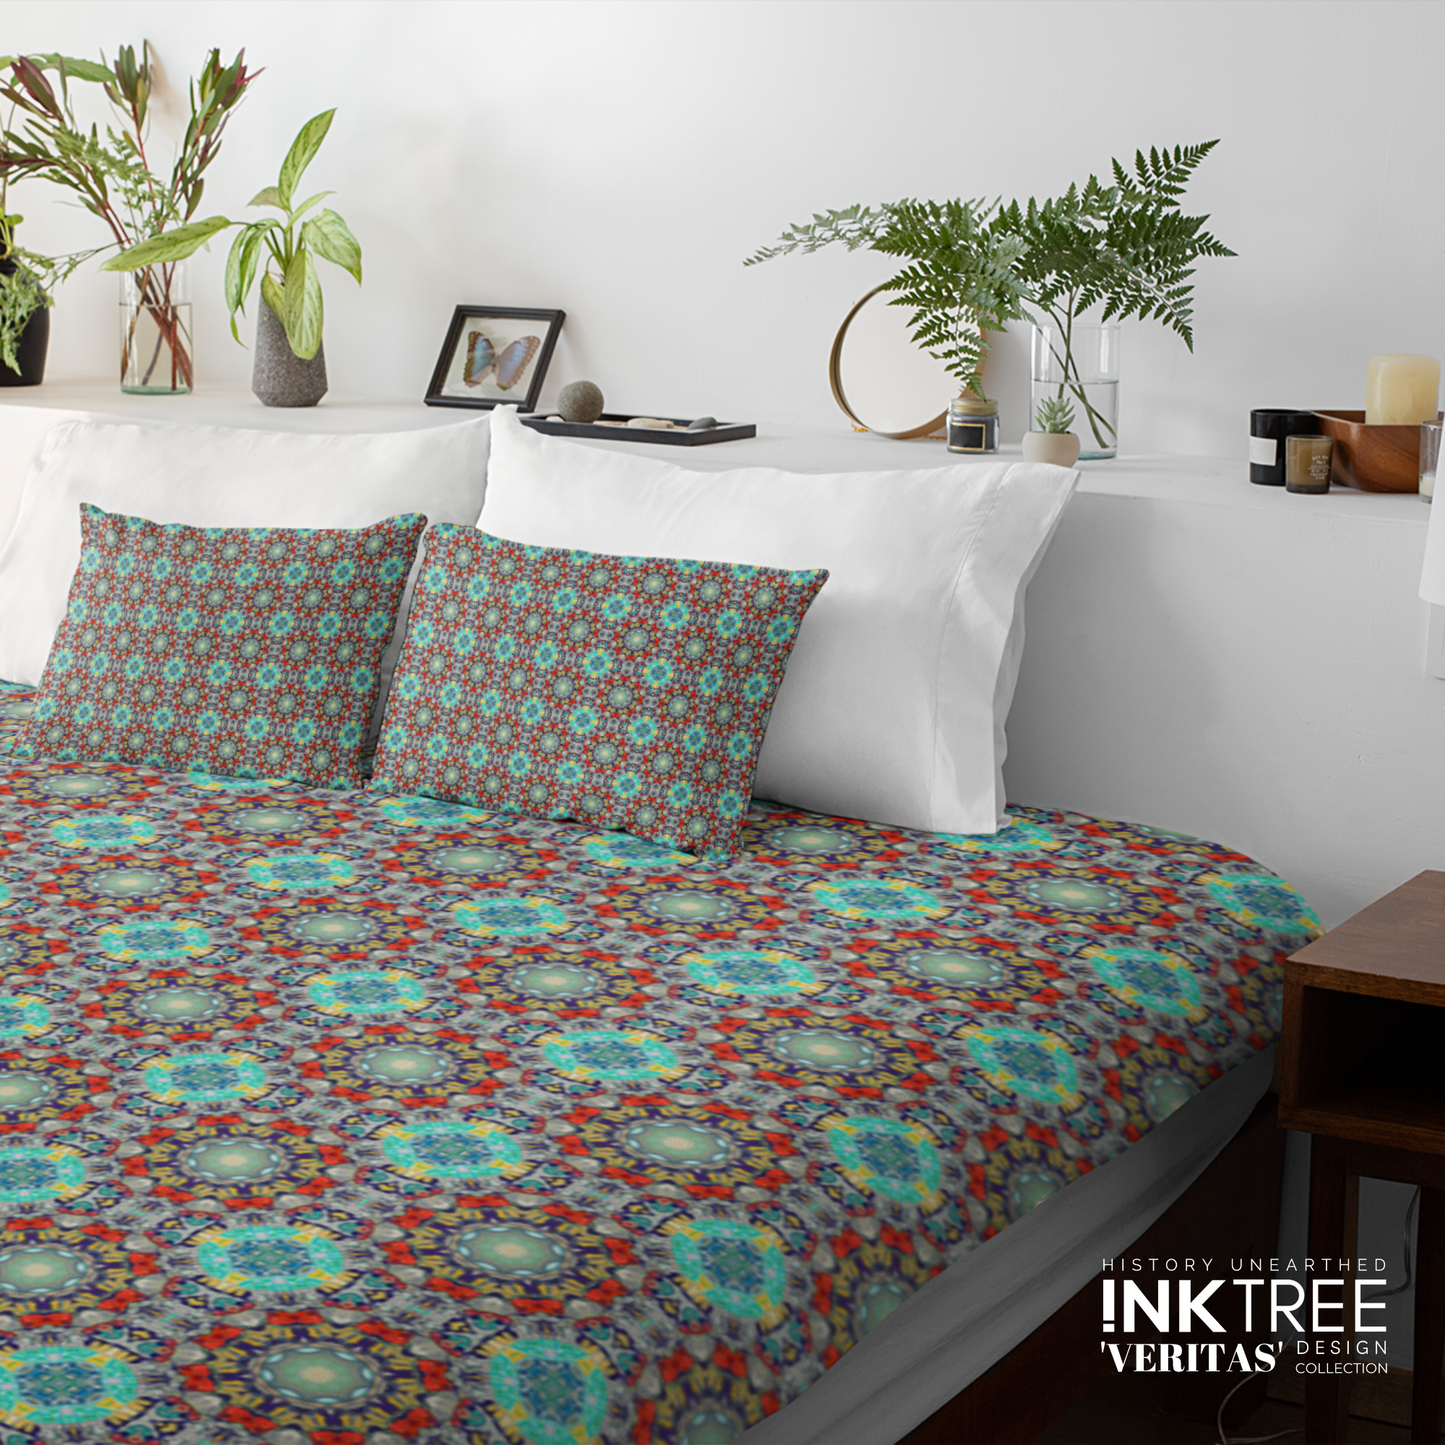 A doona cover and pillows with blue and aqua and red pattern against a white wall, leaning against white pillows and green plants in vases.